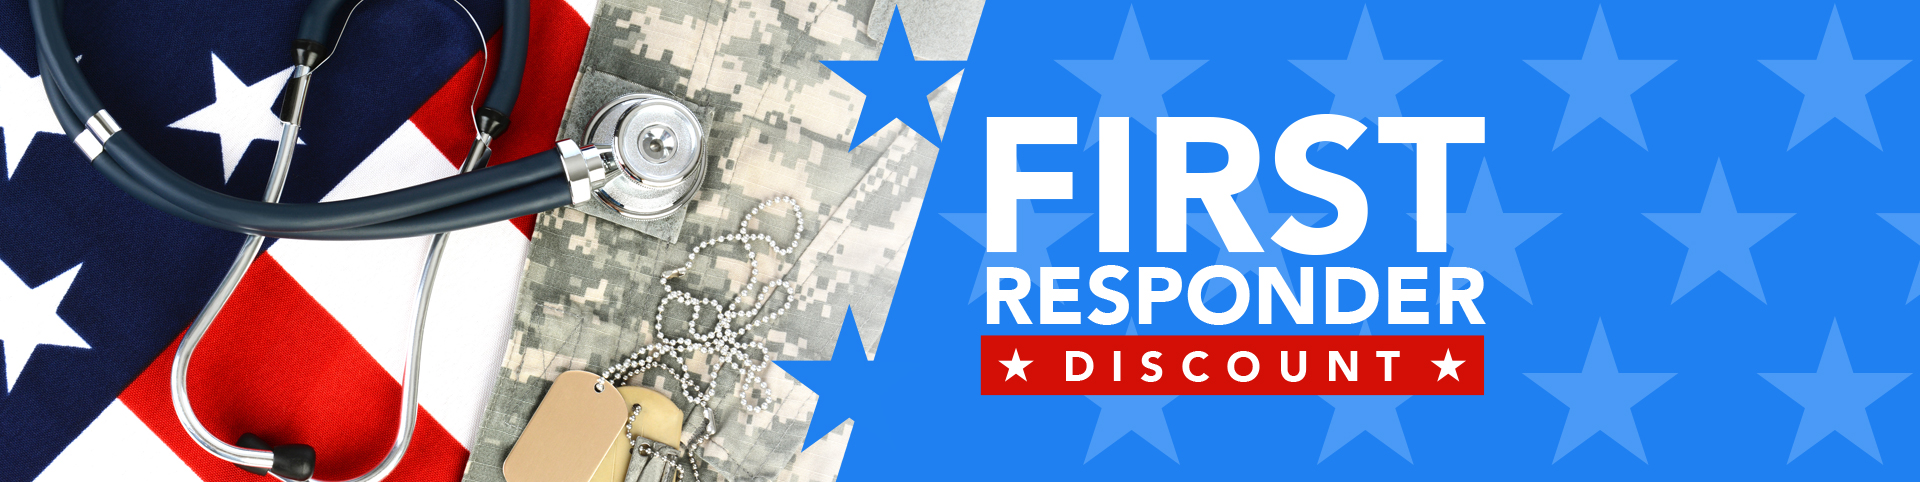 Military and First Responders Discount